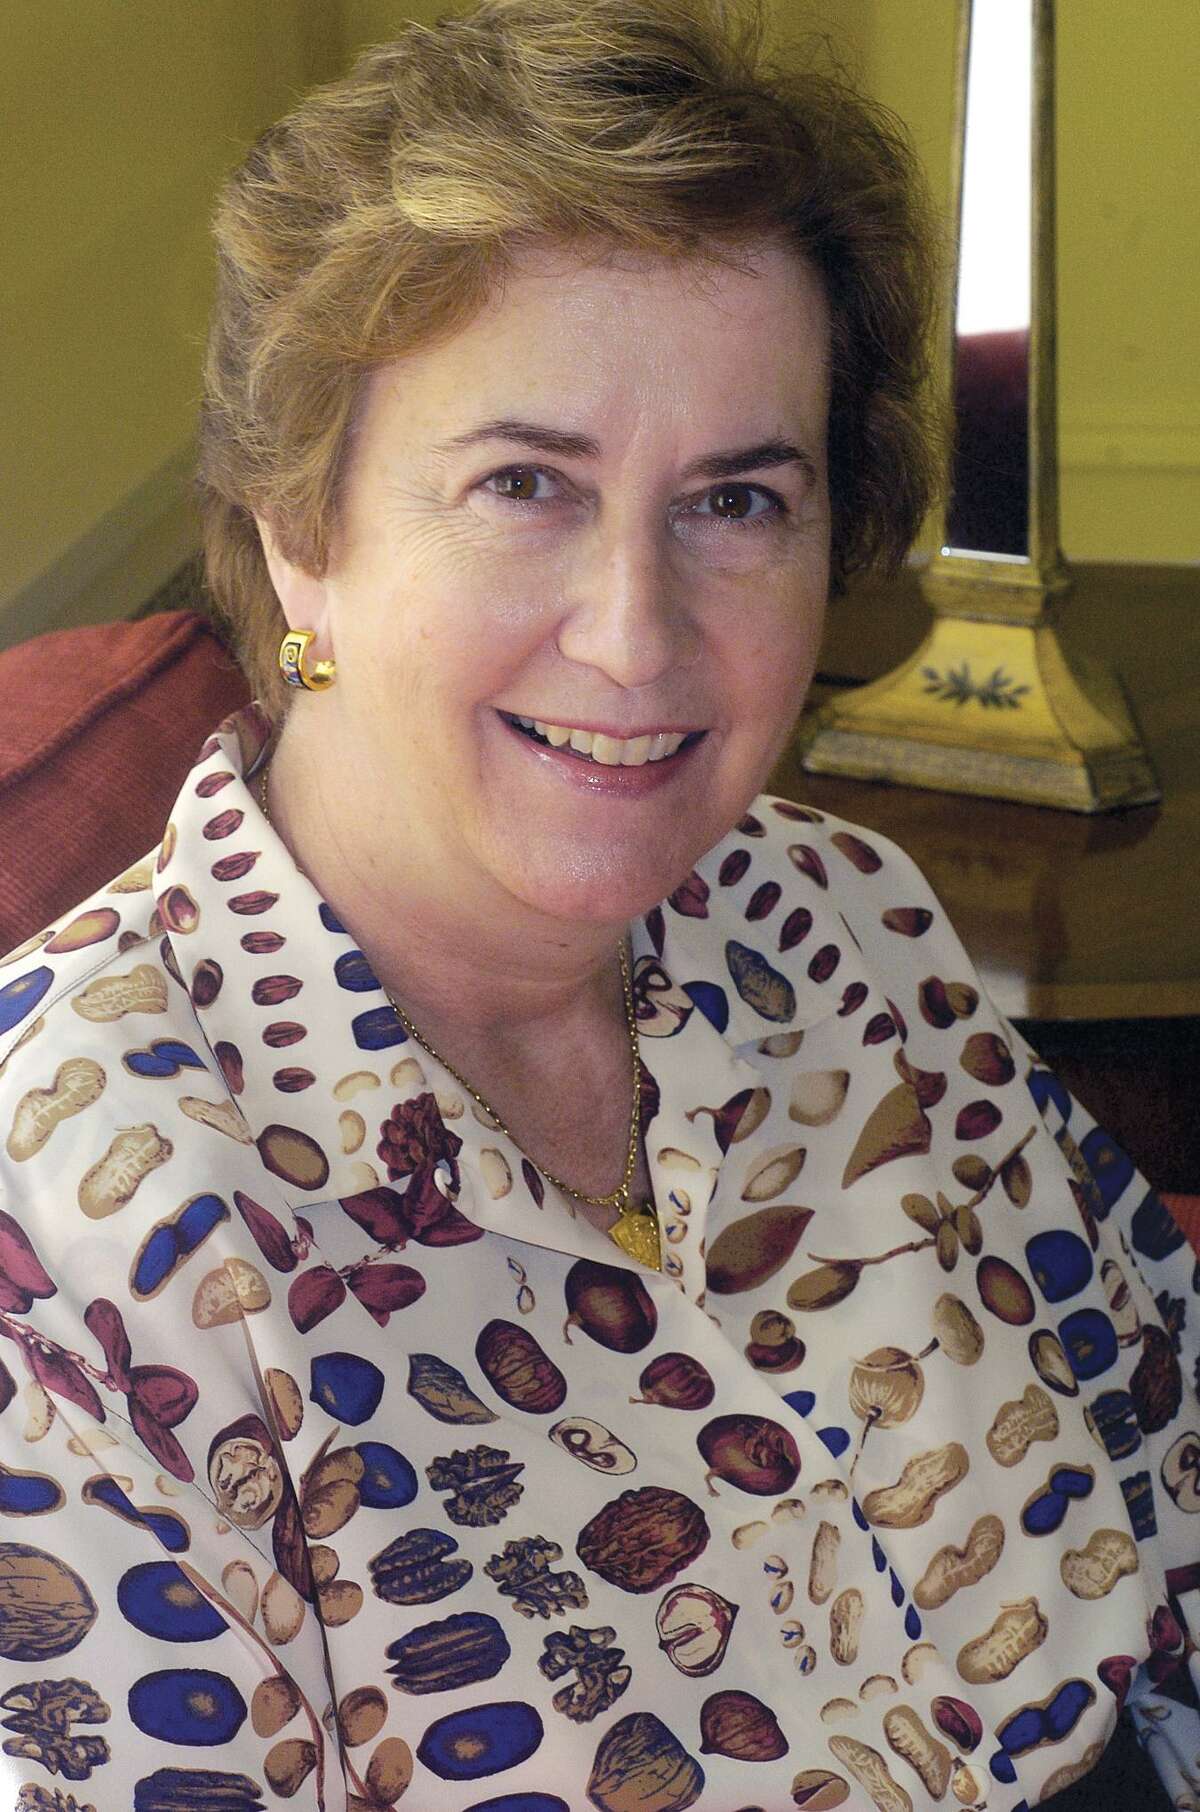 Sister Joan Magnetti, former headmistress of the Convent of the Sacred Heart, will be honored this week for her contributions to Catholic education.